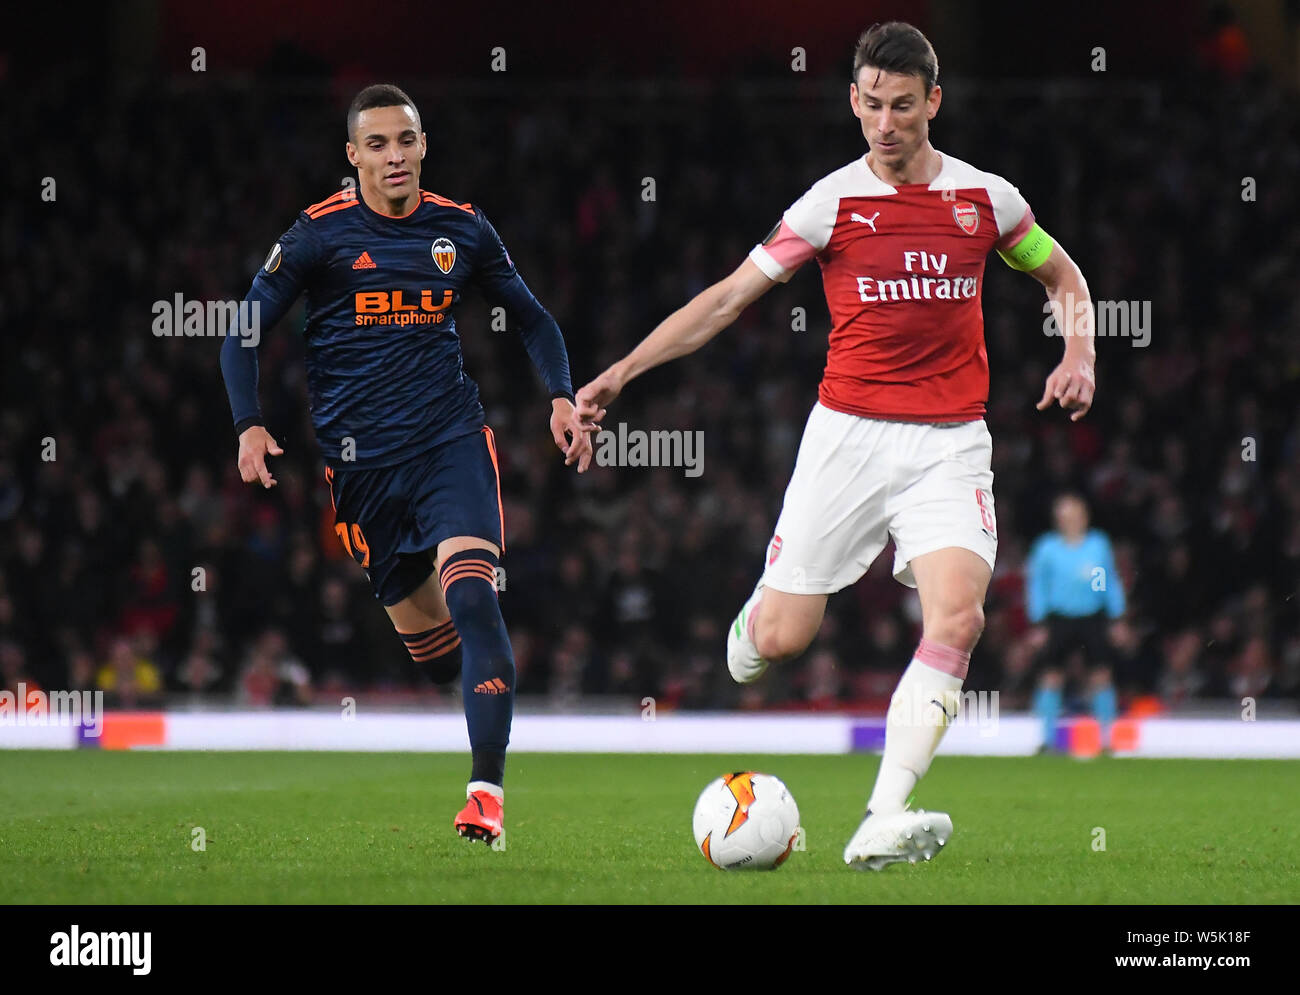 LONDON, ENGLAND - MAY 2, 2019: Rodrigo Moreno Machado of Valencia and Laurent Koscielny of Arsenal pictured during the first leg of the 2018/19 UEFA Europa League Semi-finals game between Arsenal FC (England) and Valencia CF (Spain) at Emirates Stadium. Stock Photo